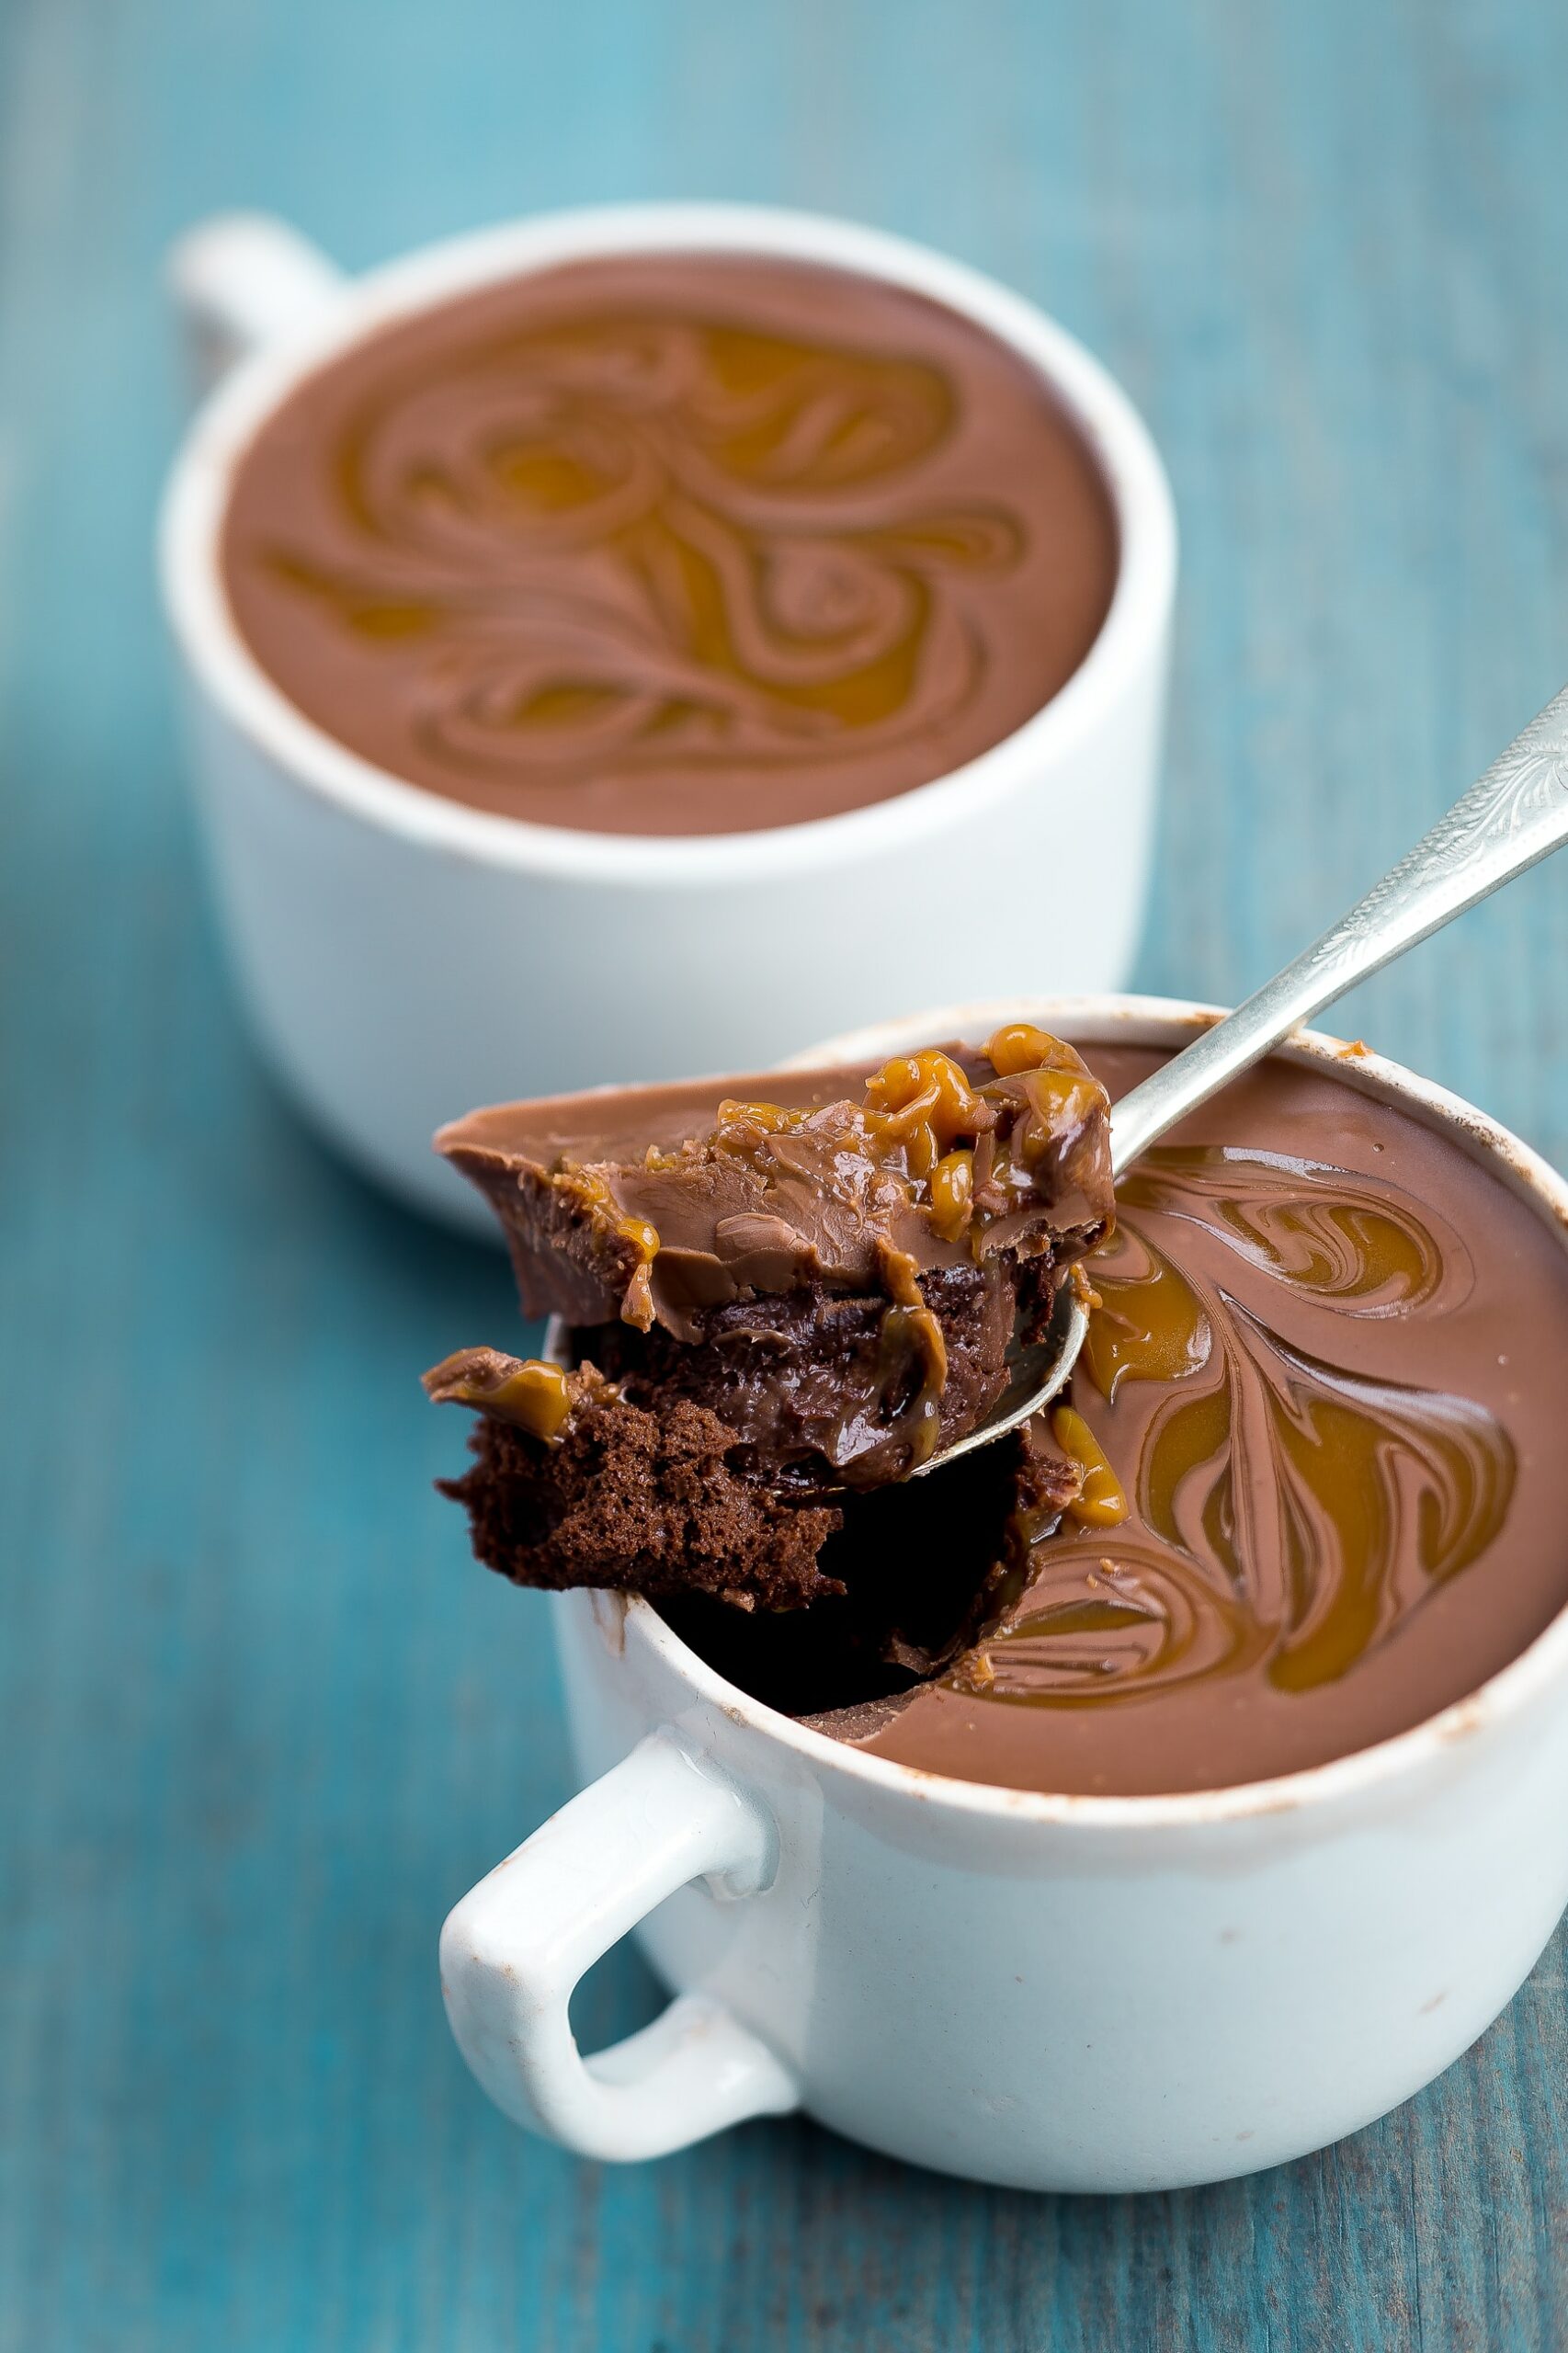 When you get those random chocolate cravings, nothing will be more satisfying than this decadent dessert that's quick to whip up in the microwave. All you need to do is mix 4 tablespoons of flour, 2 tablespoons of cocoa powder, 4 tablespoons of sugar, an egg, 3 tablespoons of milk, and 3 tablespoons of vegetable oil in a microwave safe mug. Add a dash of vanilla extract for flavor too! Then just microwave for 1.5 to 2 minutes for a rich, gooey chocolate cake that's ready in a flash.